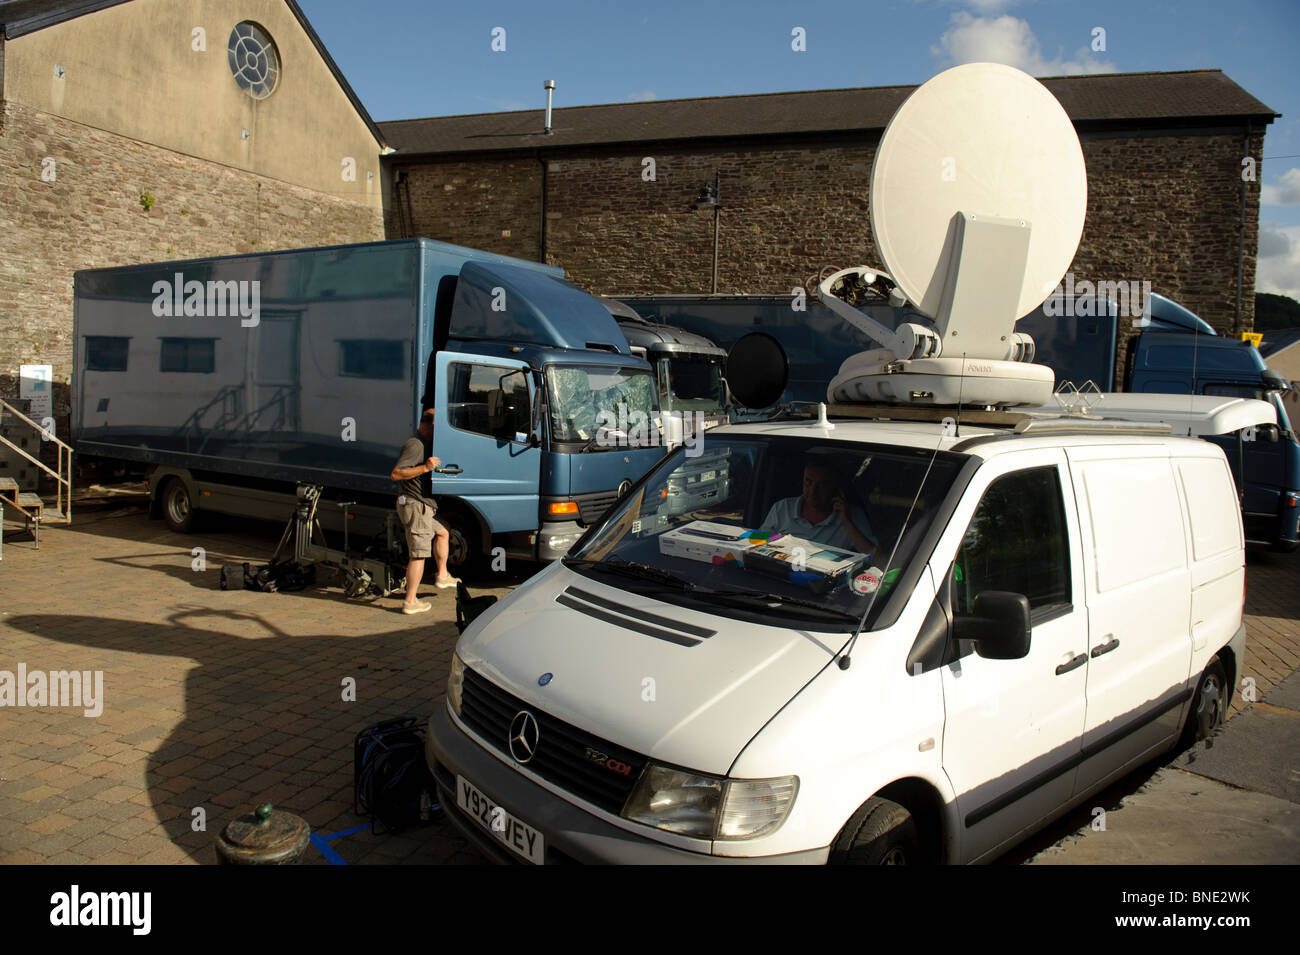 Outside broadcast vans broadcasting a television programme live, Wales UK Stock Photo